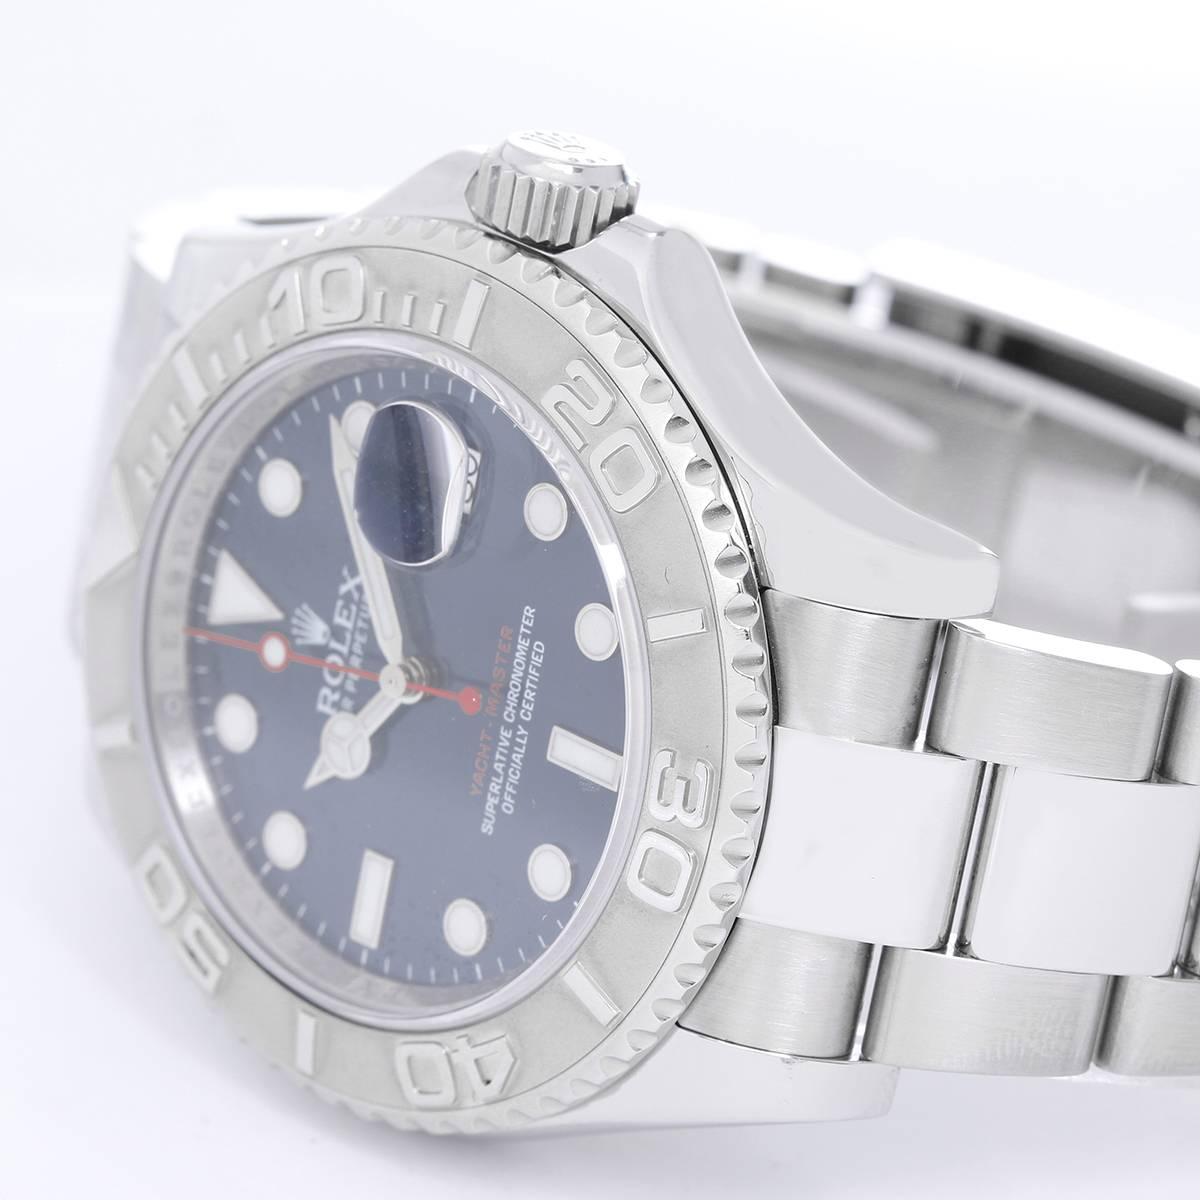 Rolex Yacht-Master Men's Stainless Steel Watch 116622 -  Automatic winding, 31 jewels, Quickset, sapphire crystal. Stainless steel case with platinum bezel  (40mm diameter). Blue dial with luminous markers. Stainless steel Oyster bracelet with